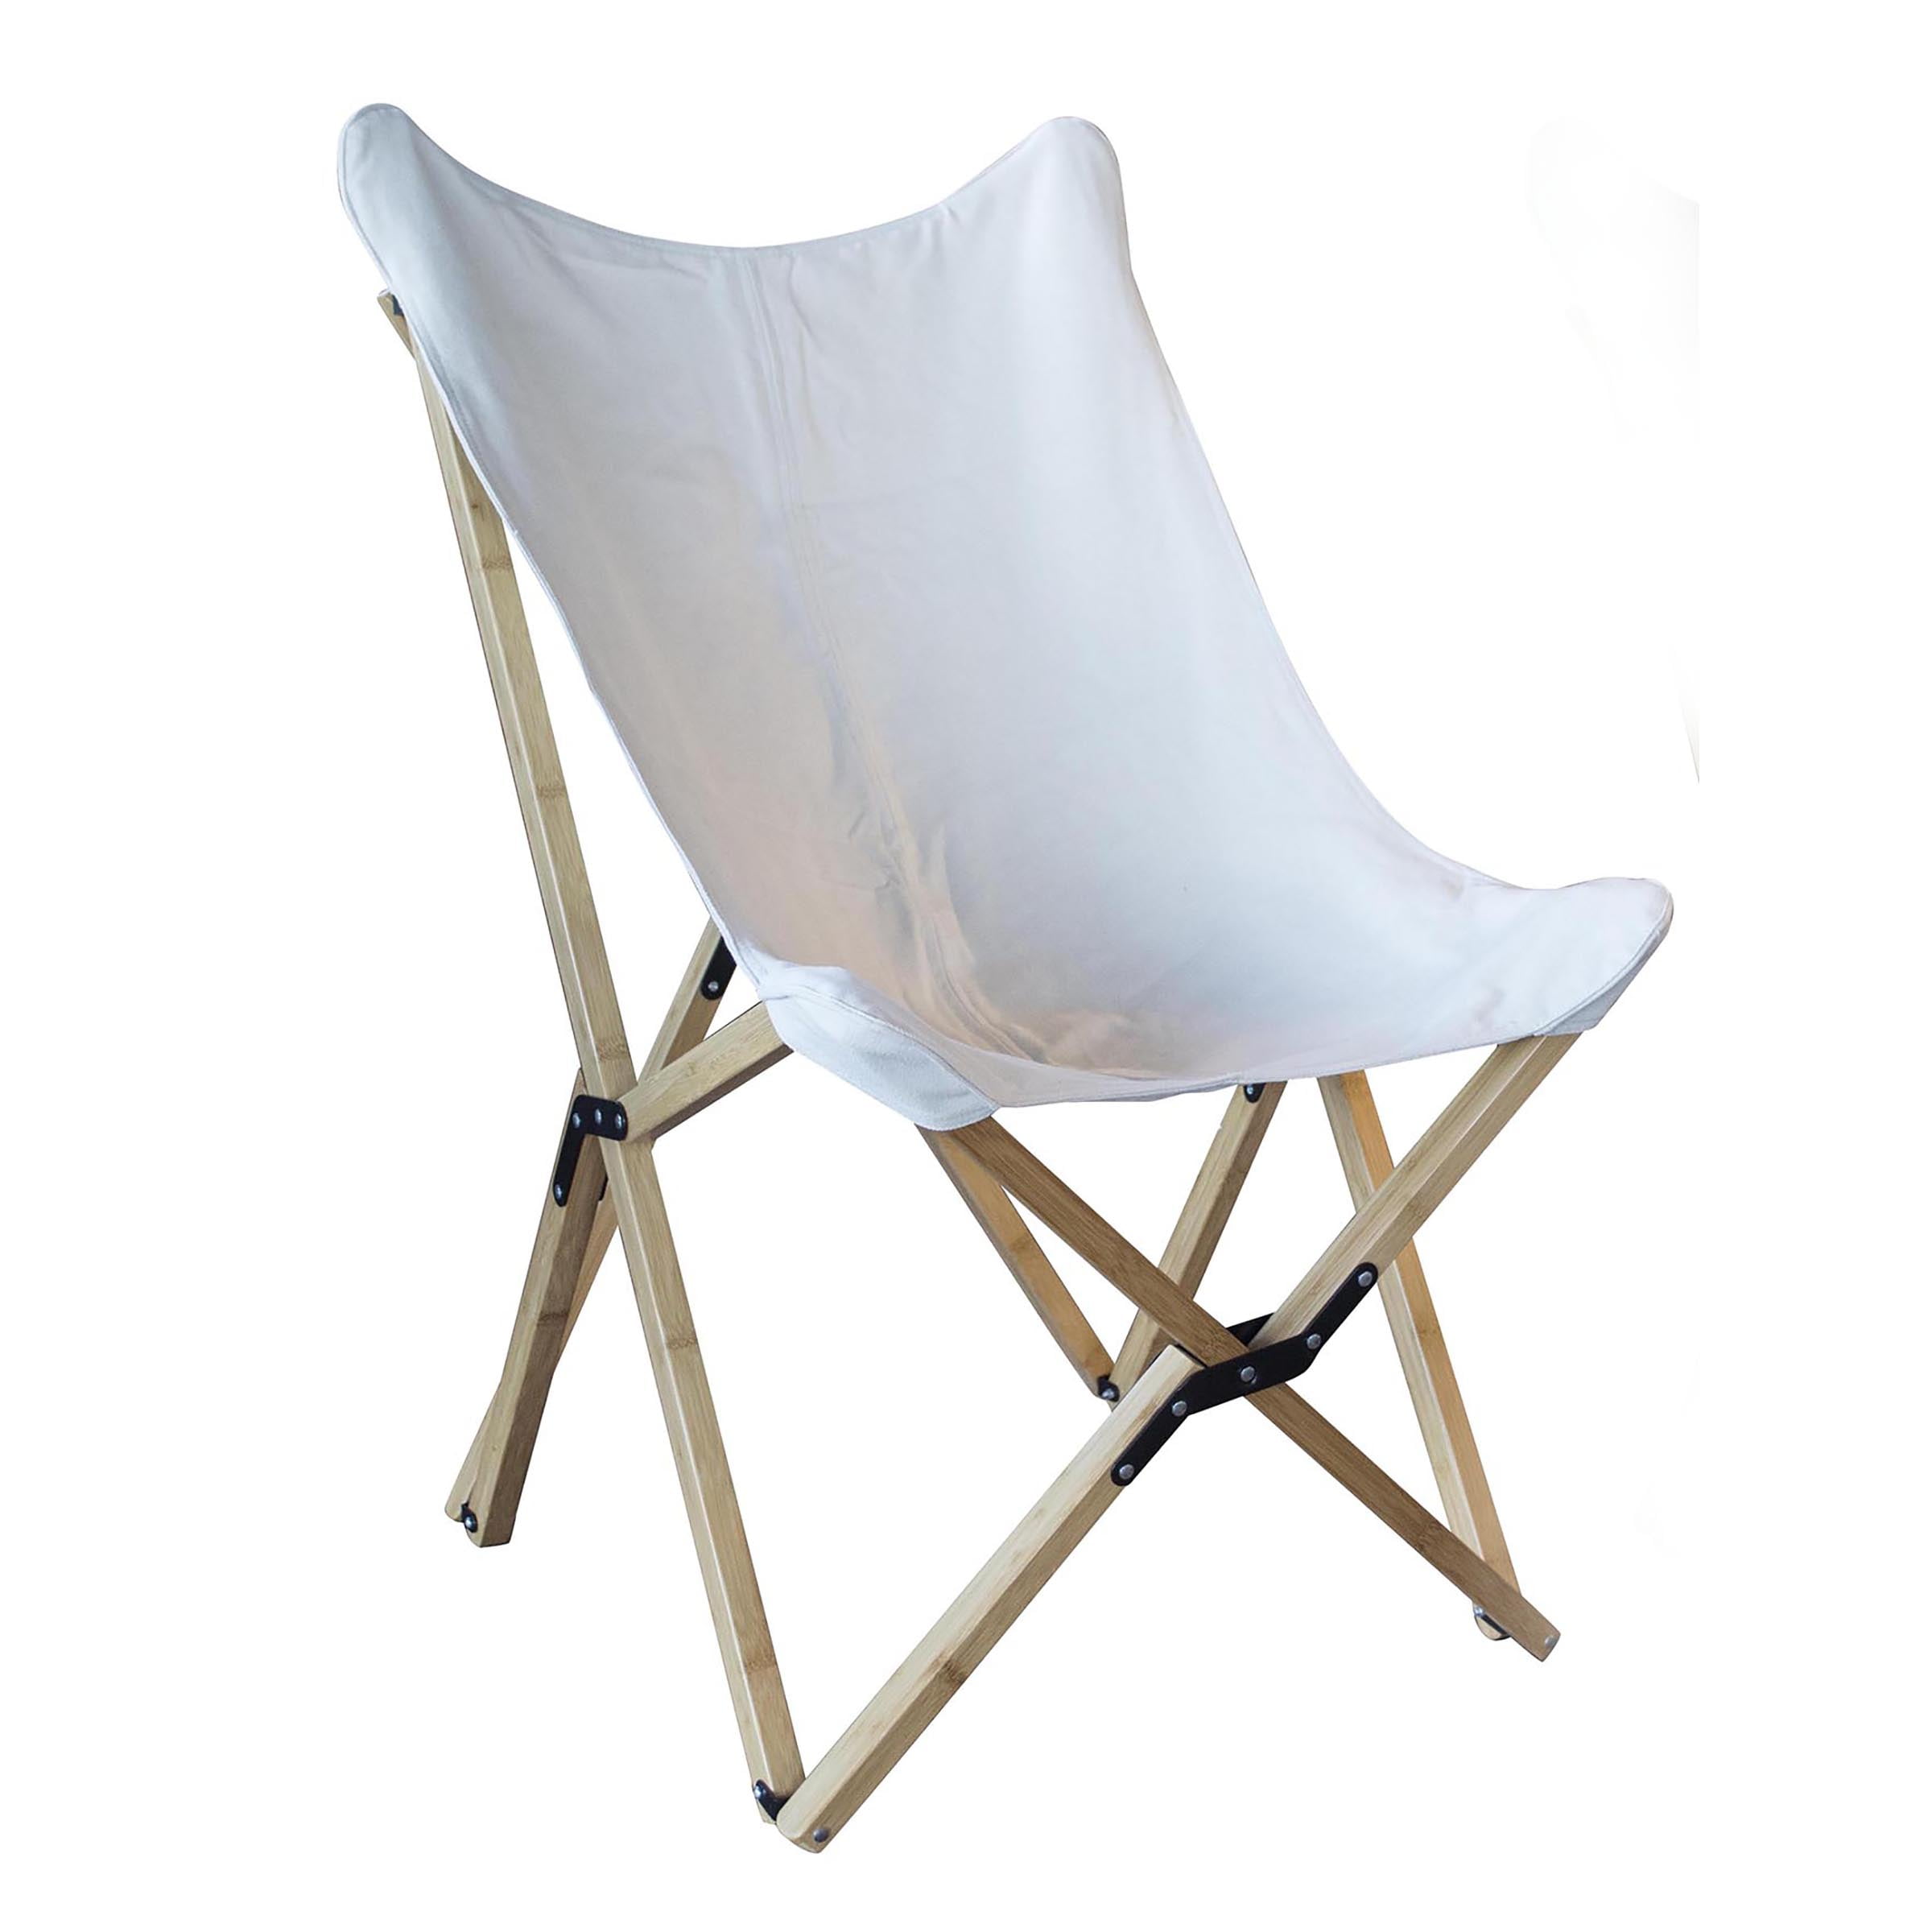 Bfcbcw Canvas & Bamboo Butterfly Chair - Whit